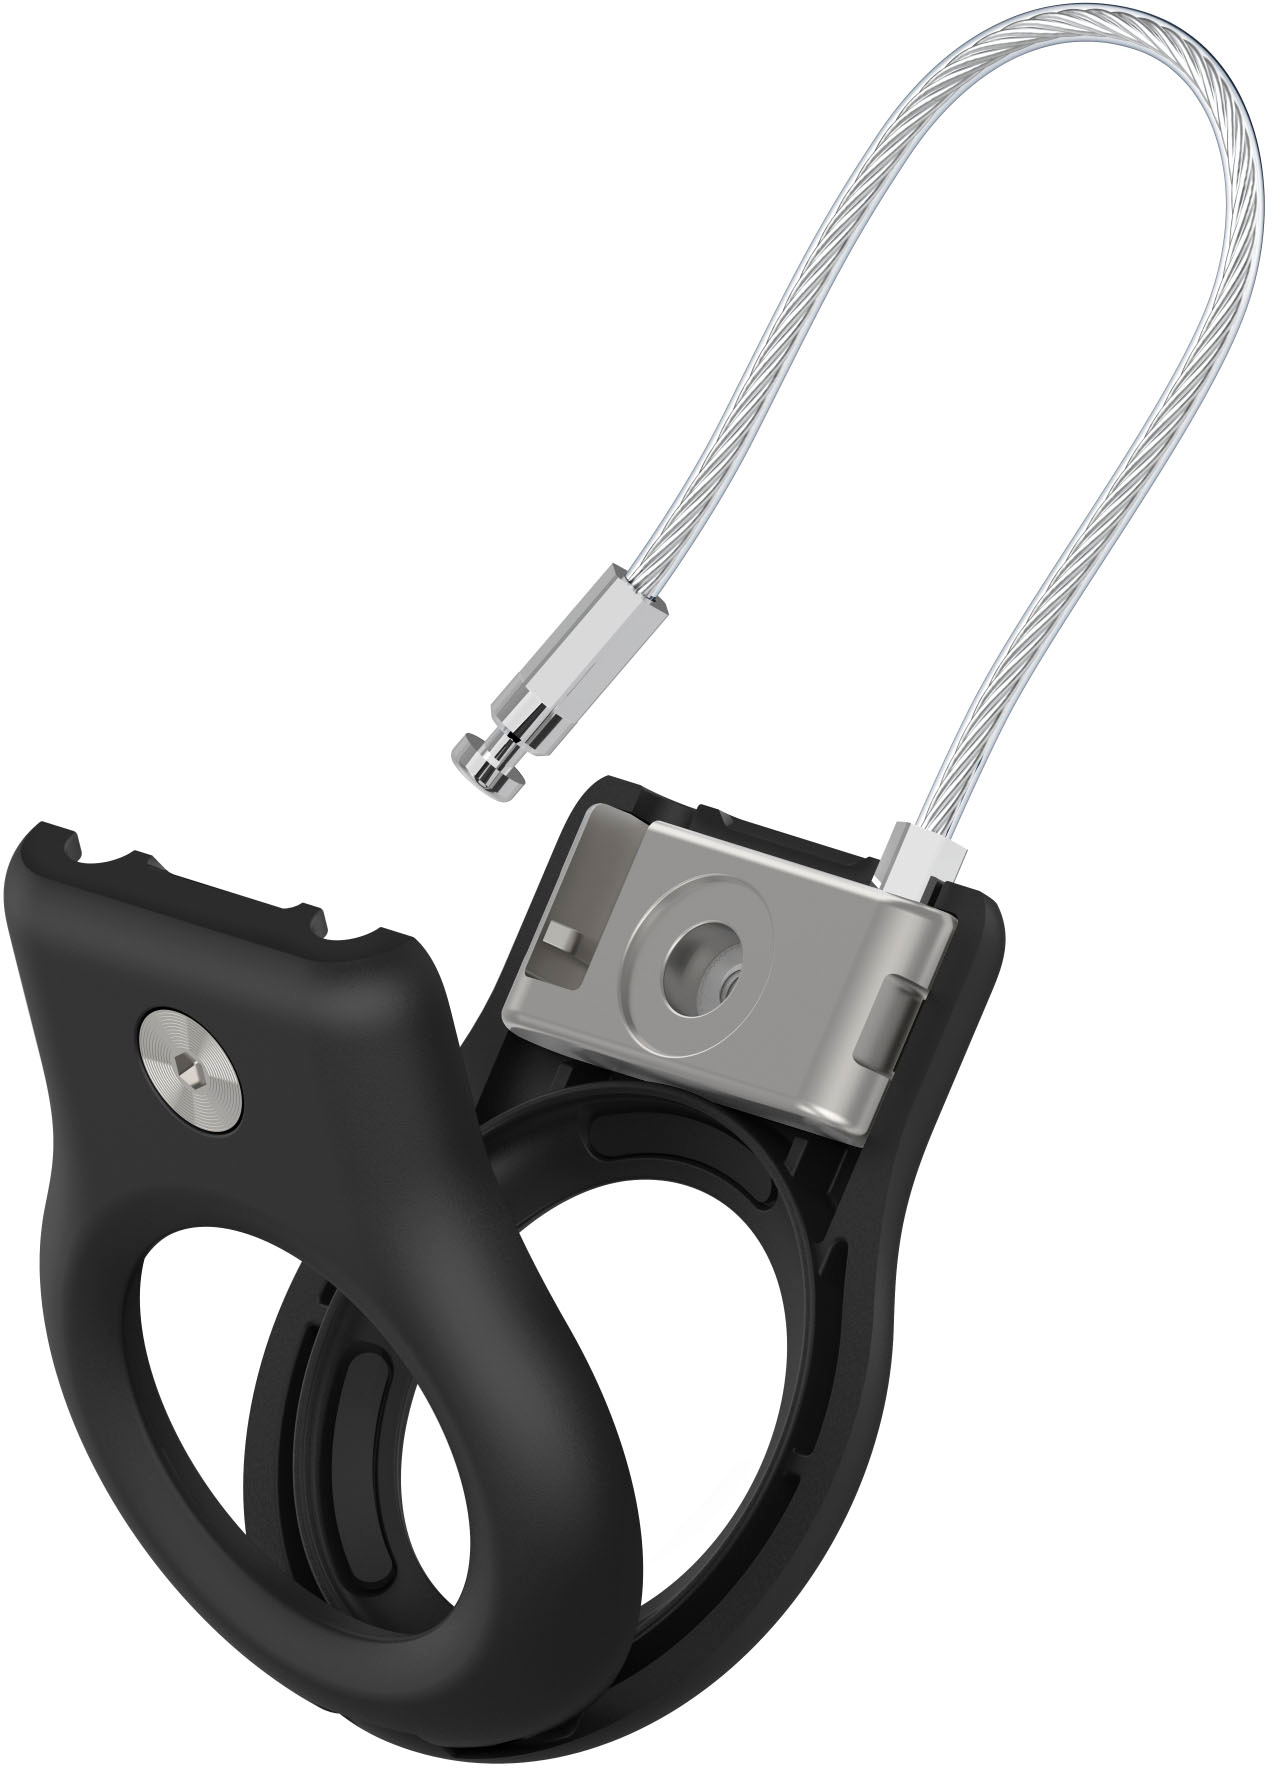 SPGUARD Compatible with Apple AirTag Secure Holder with Wire Cable